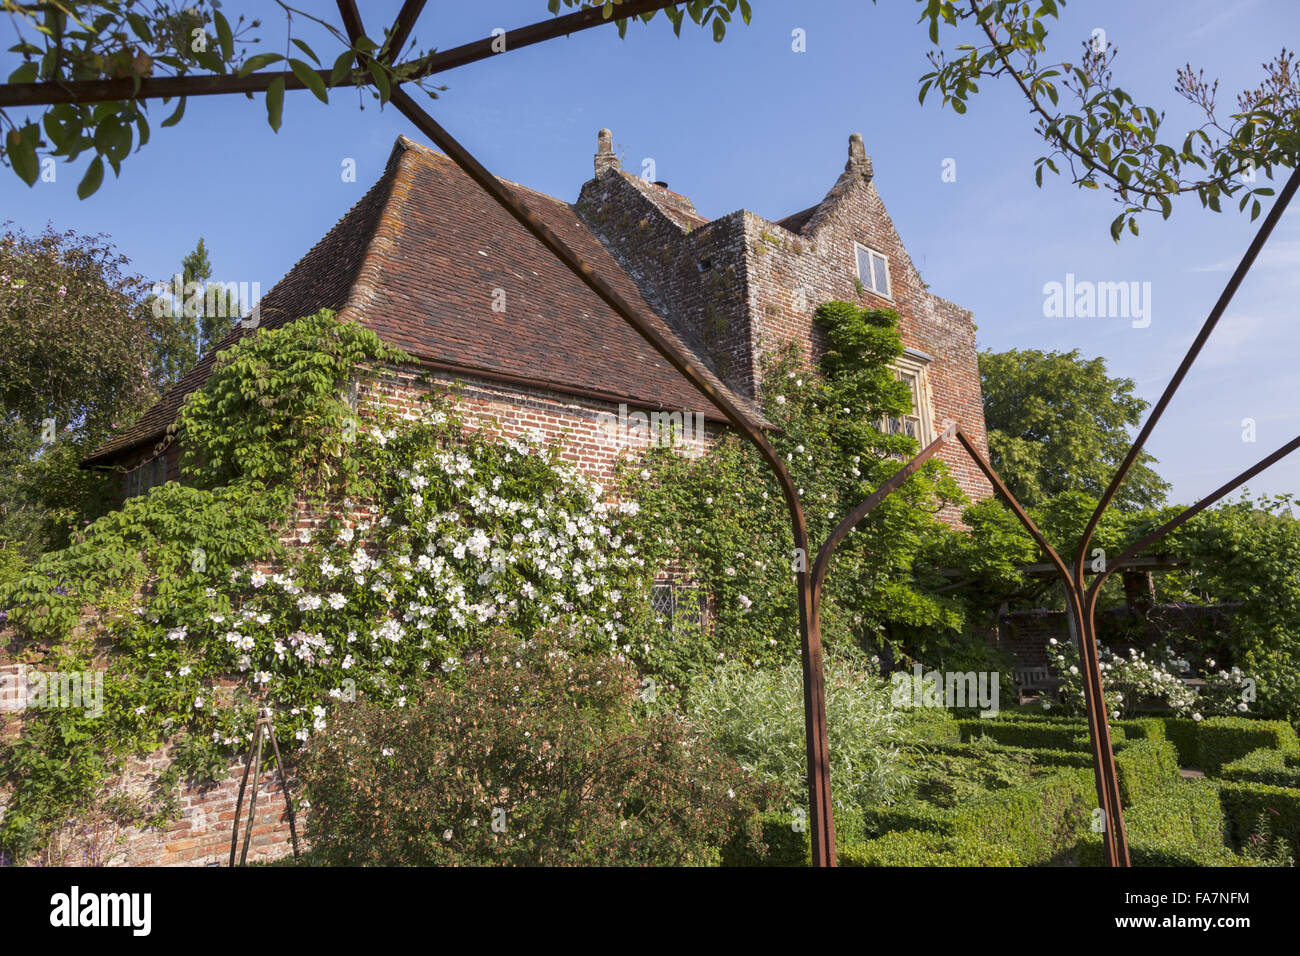 The gardens in July at Sissinghurst Castle, Kent. Sissinghurst gained international fame in the 1930s when Vita Sackville-West and Harold Nicolson created a garden there. Stock Photo